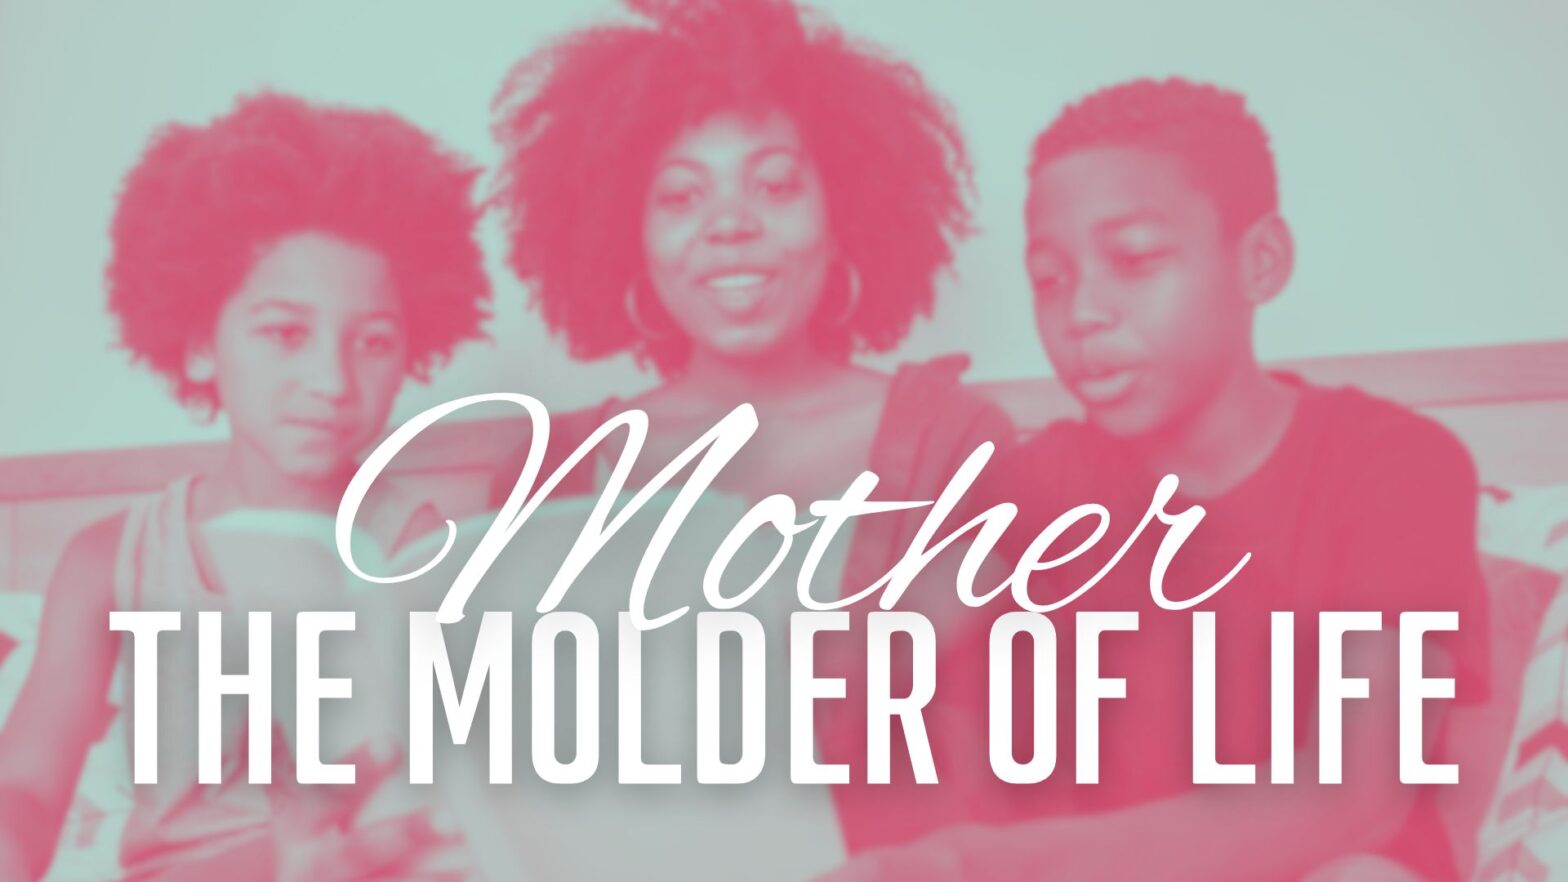 Mothers: The Molder of Life